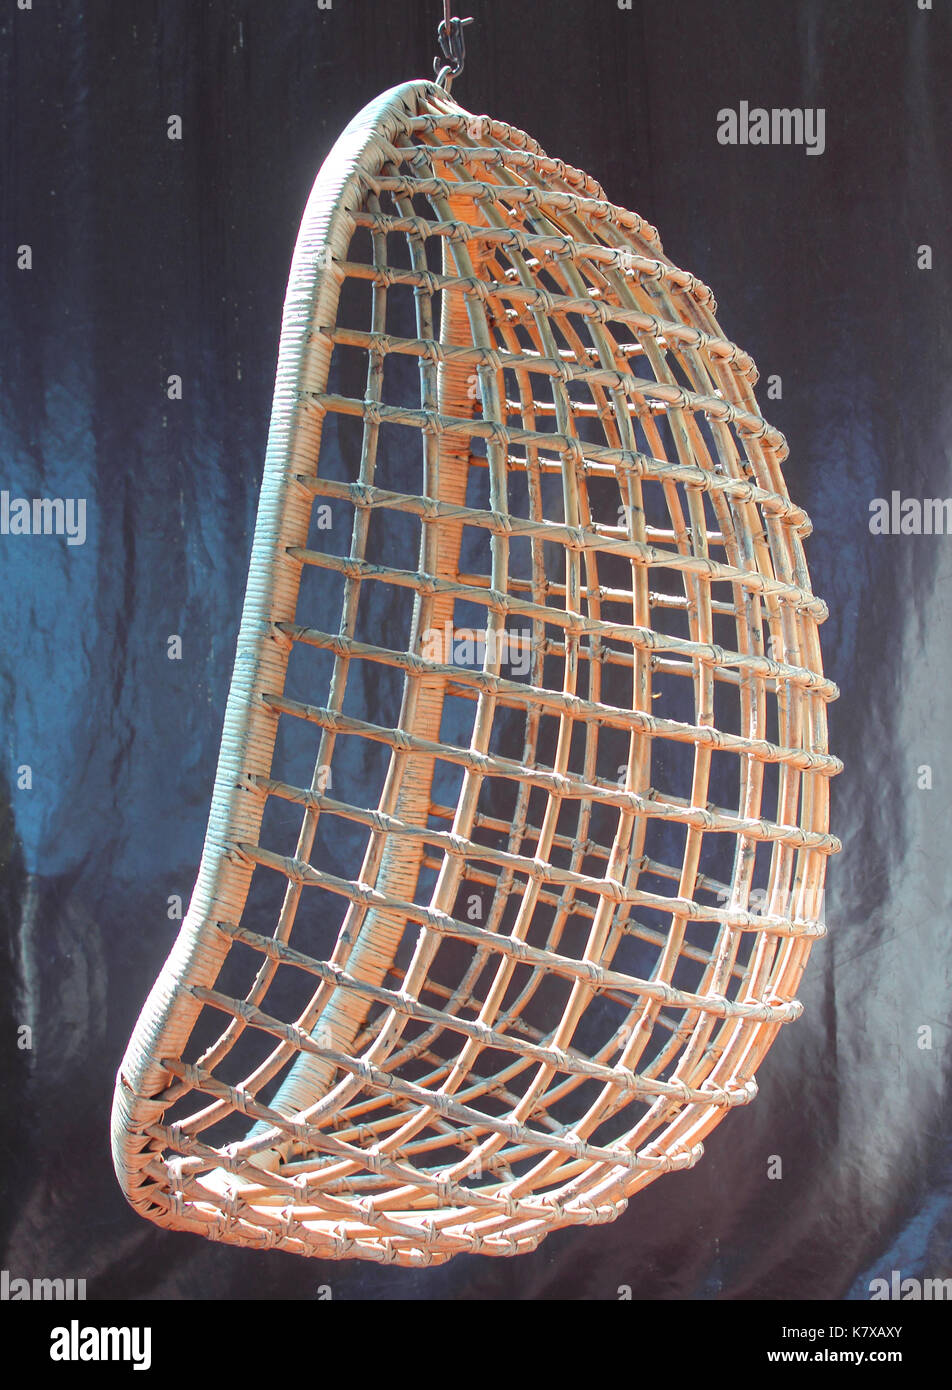 Rattan-Hängesessel seitlich; Rattan basket chair viewed from the side Stock Photo